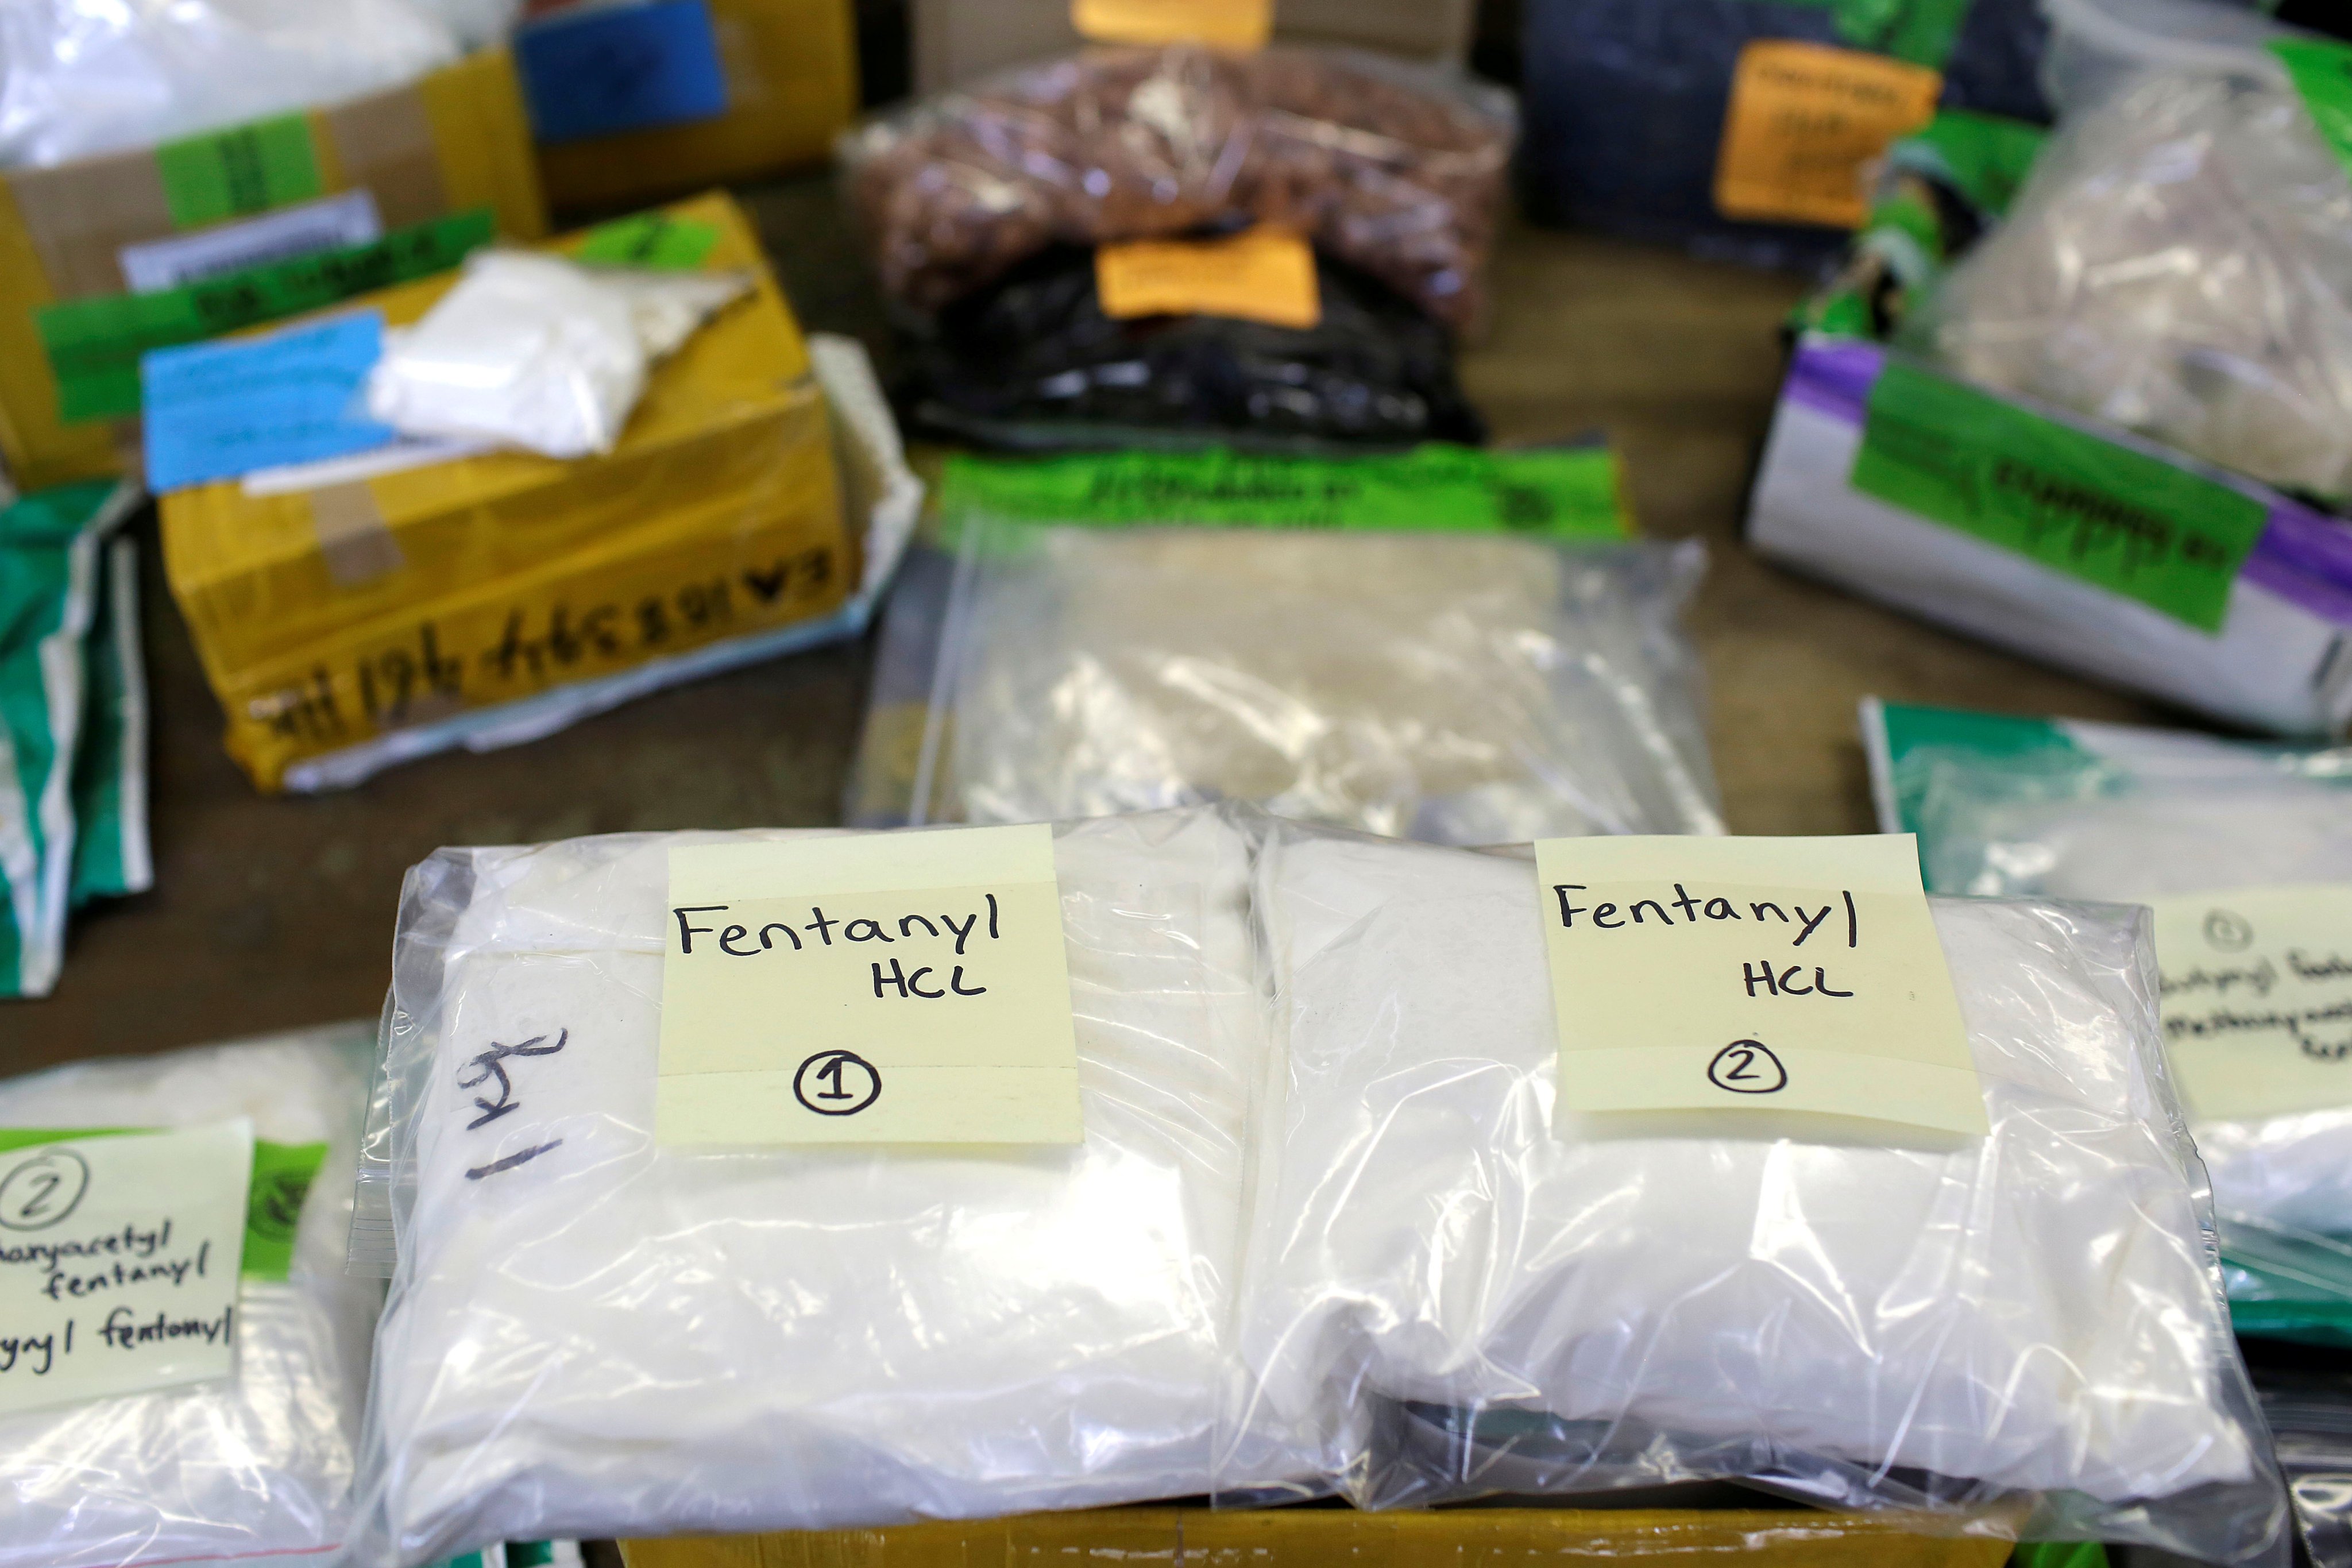 Synthetic opioids such as fentanyl are responsible for tens of thousands of deaths in the US each year. Photo: Reuters